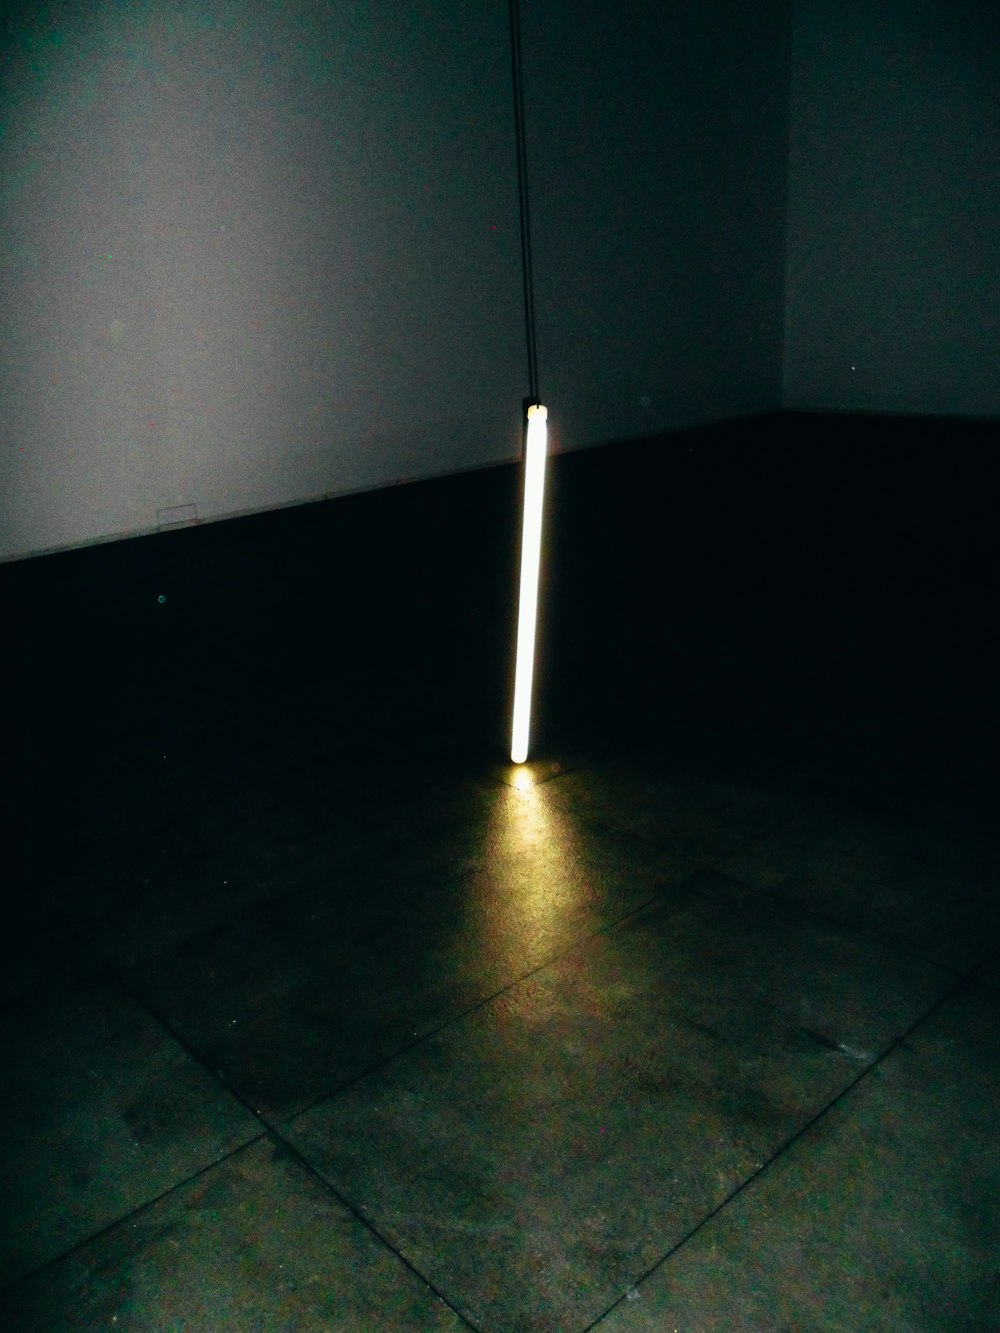 a light is shining on the floor in a dark room